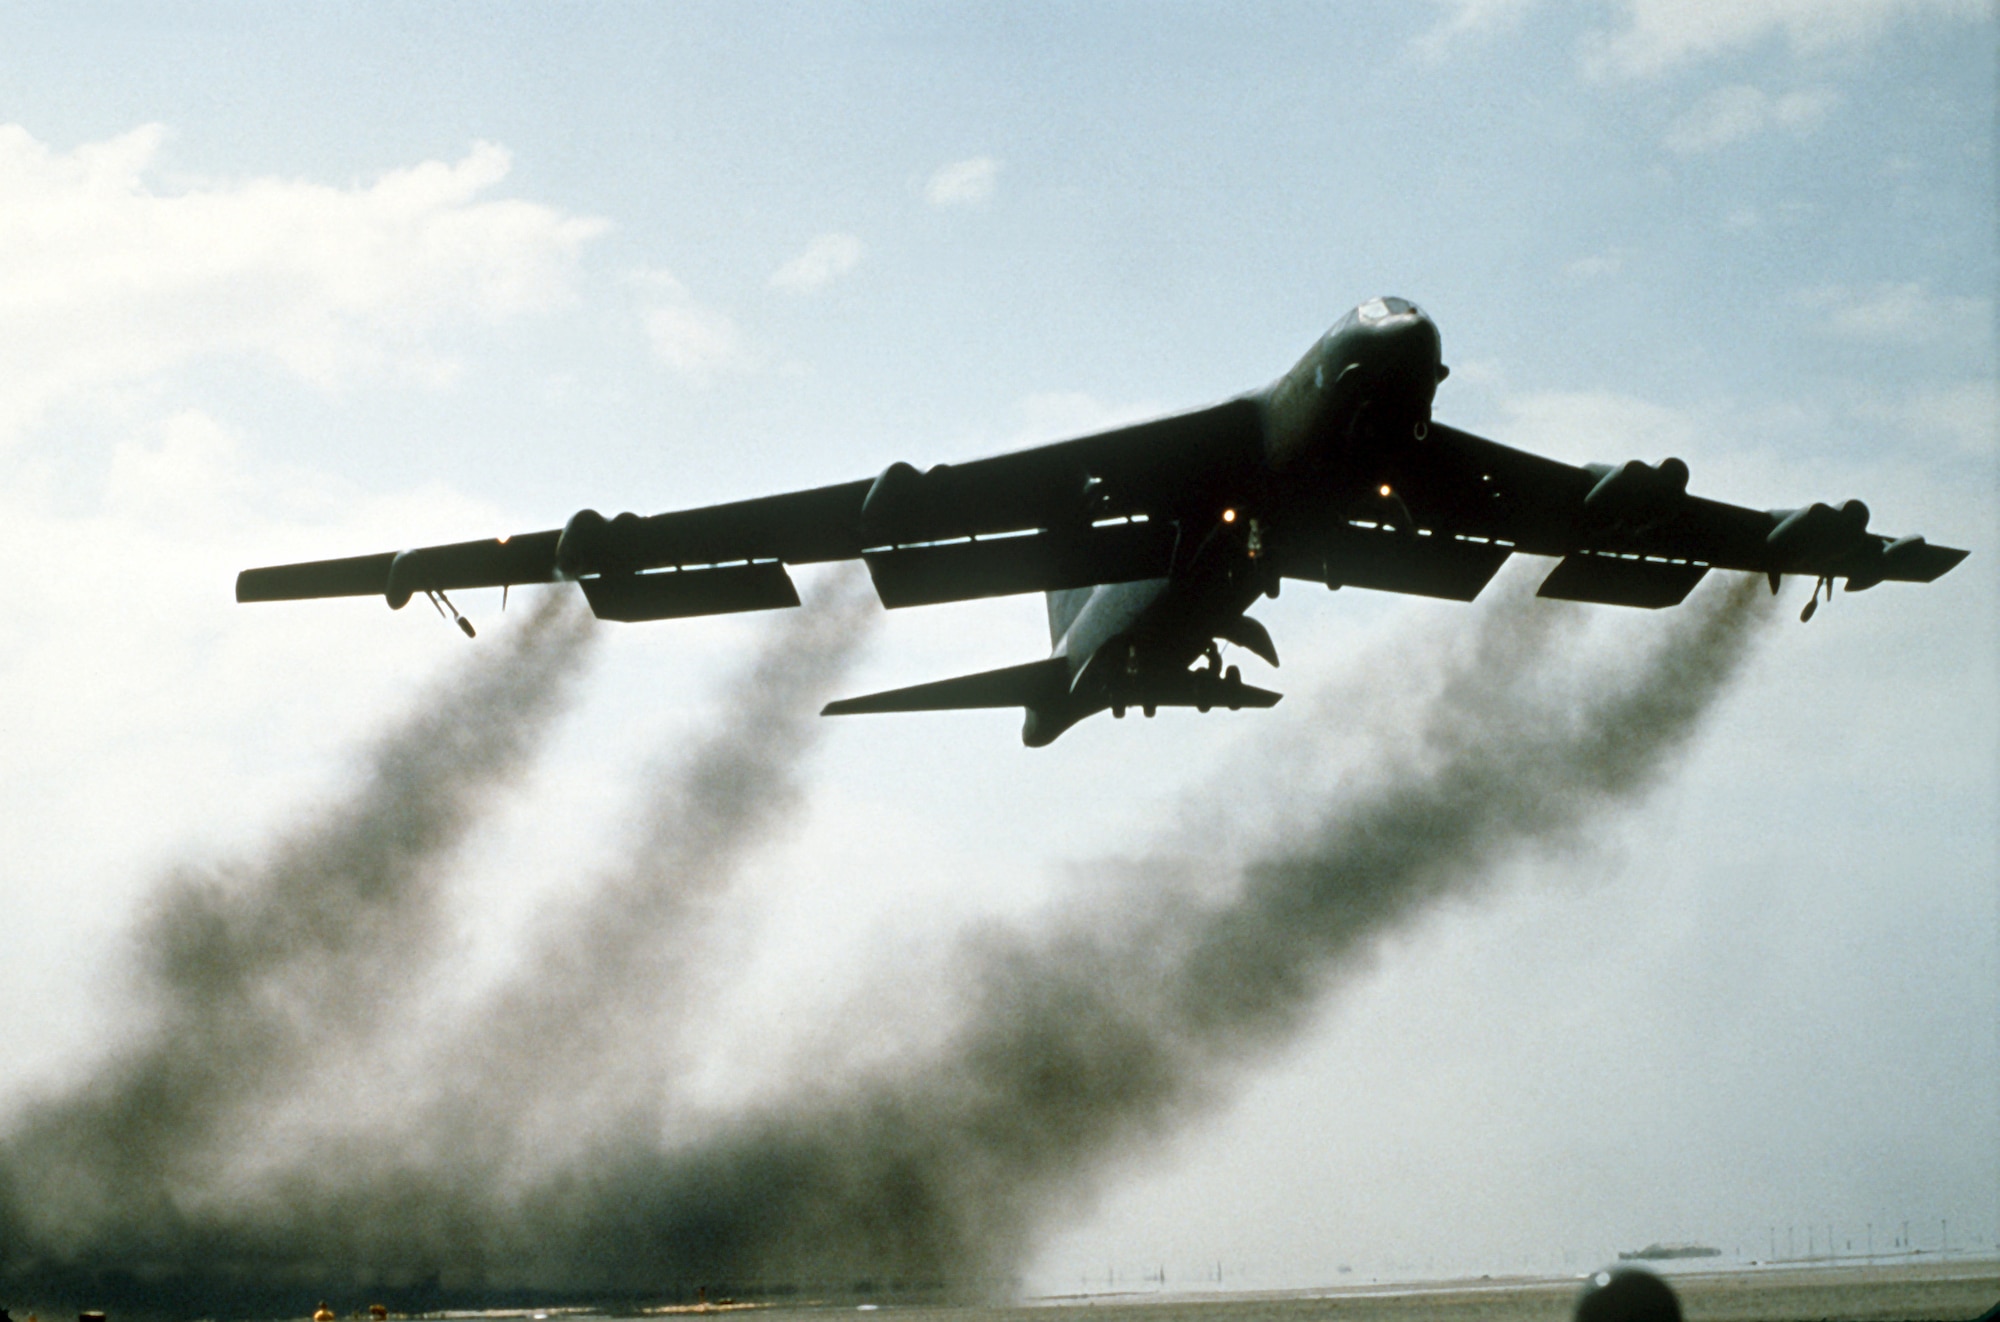 A B-52G Stratofortress aircraft takes off on its return flight to the United States after being deployed during Operation Desert Storm.